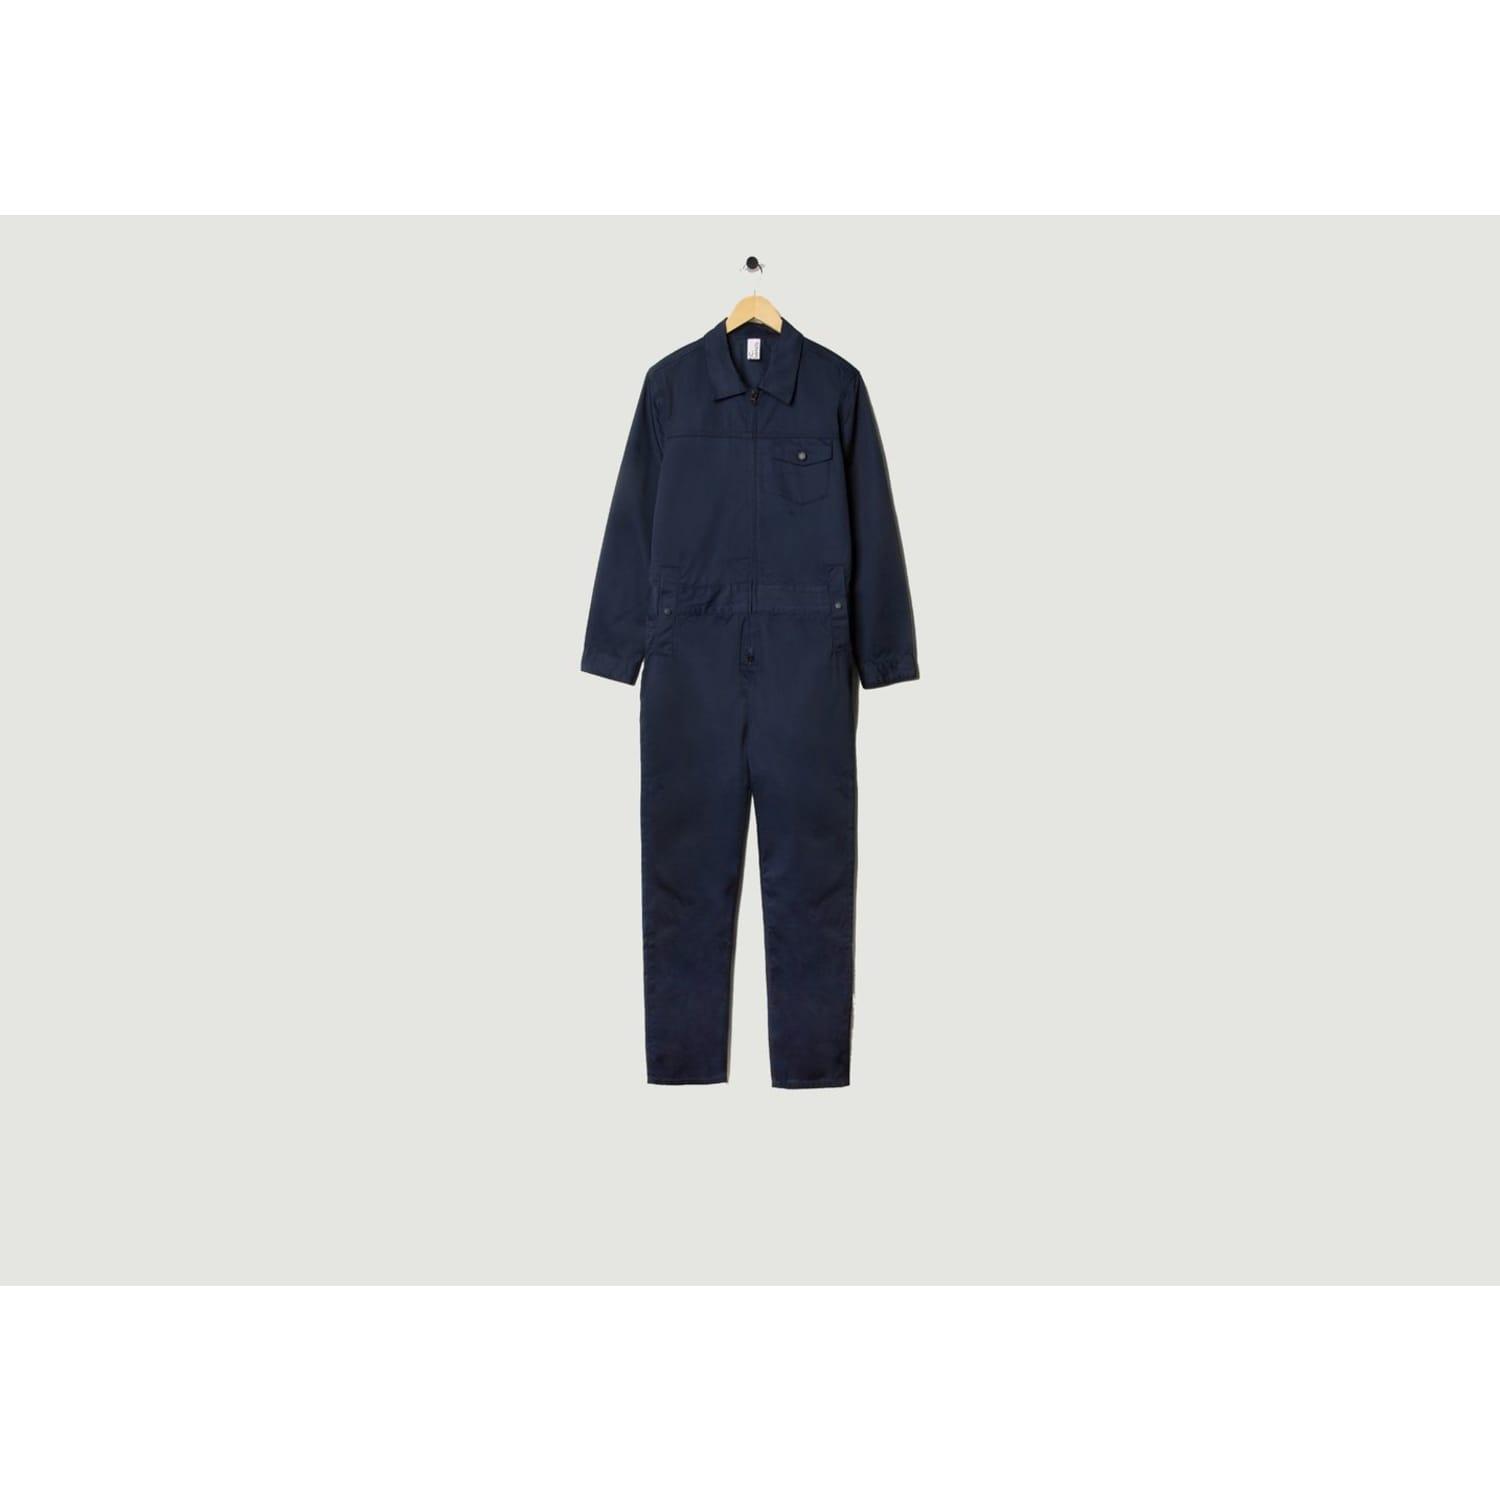 M.C. OVERALLS Navy Blue Twill Dungarees | Lyst